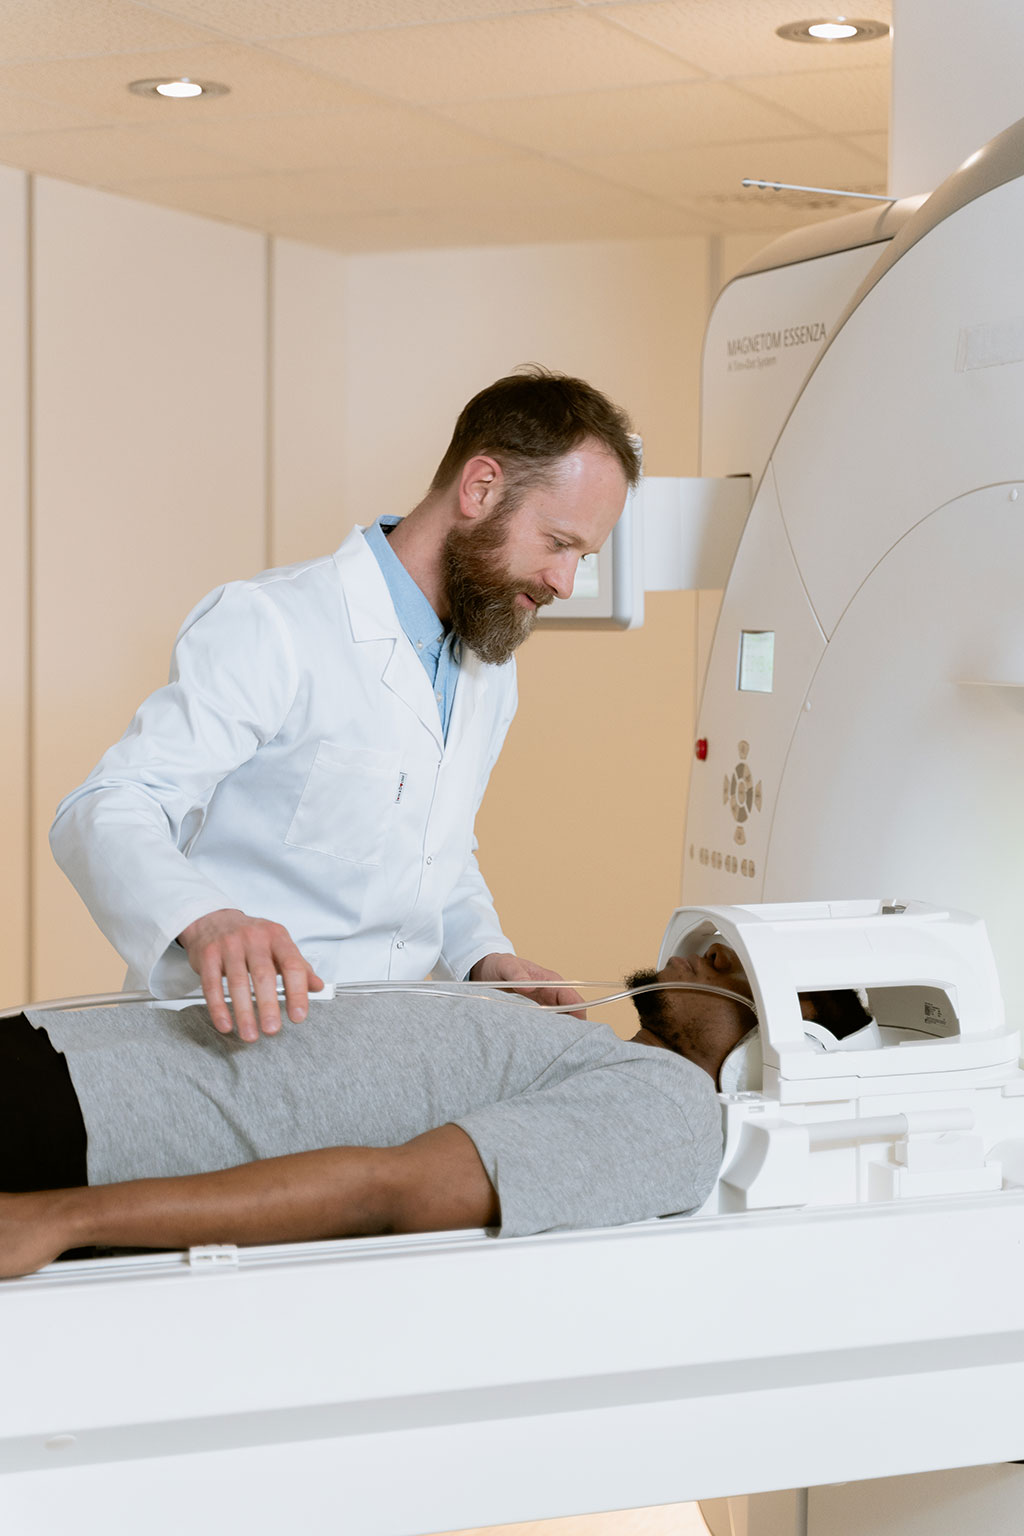 Image: Advanced imaging may help in clinical treatment of prostate cancer (Photo courtesy of Pexels)